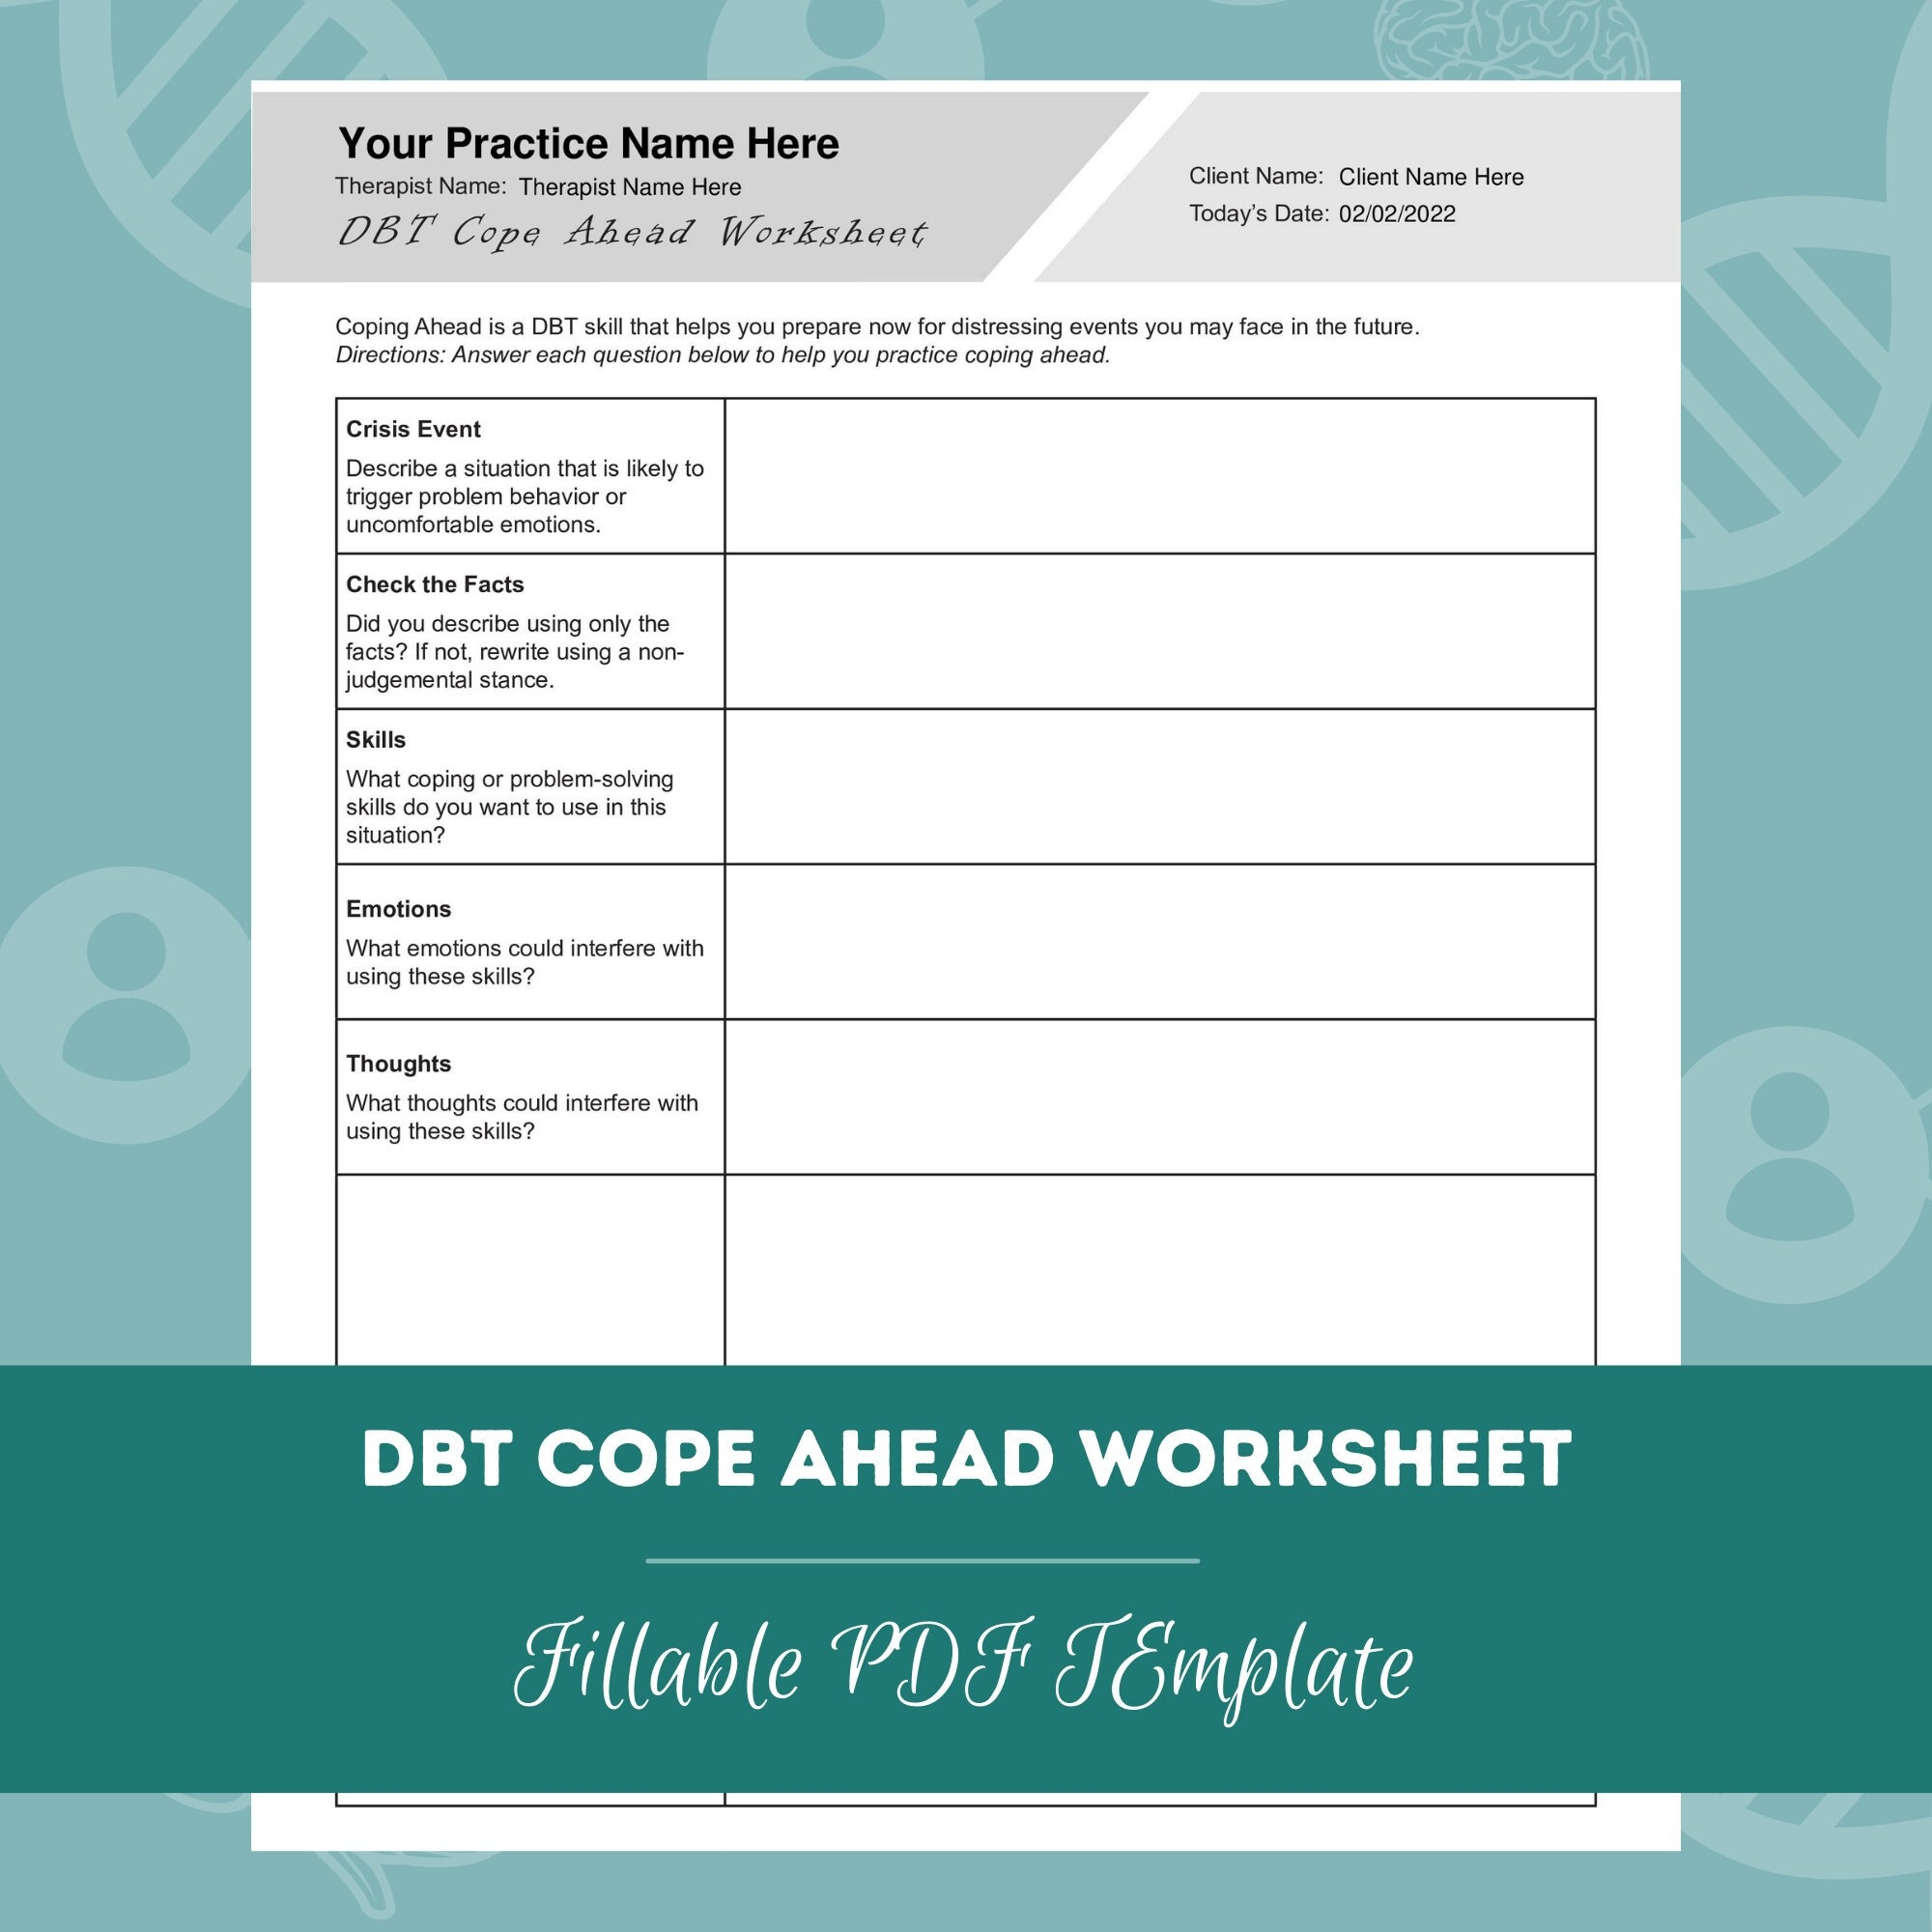 DBT Cope Ahead Worksheet Editable Fillable PDF Template For Counselors Psychologists Social Workers Therapists Etsy